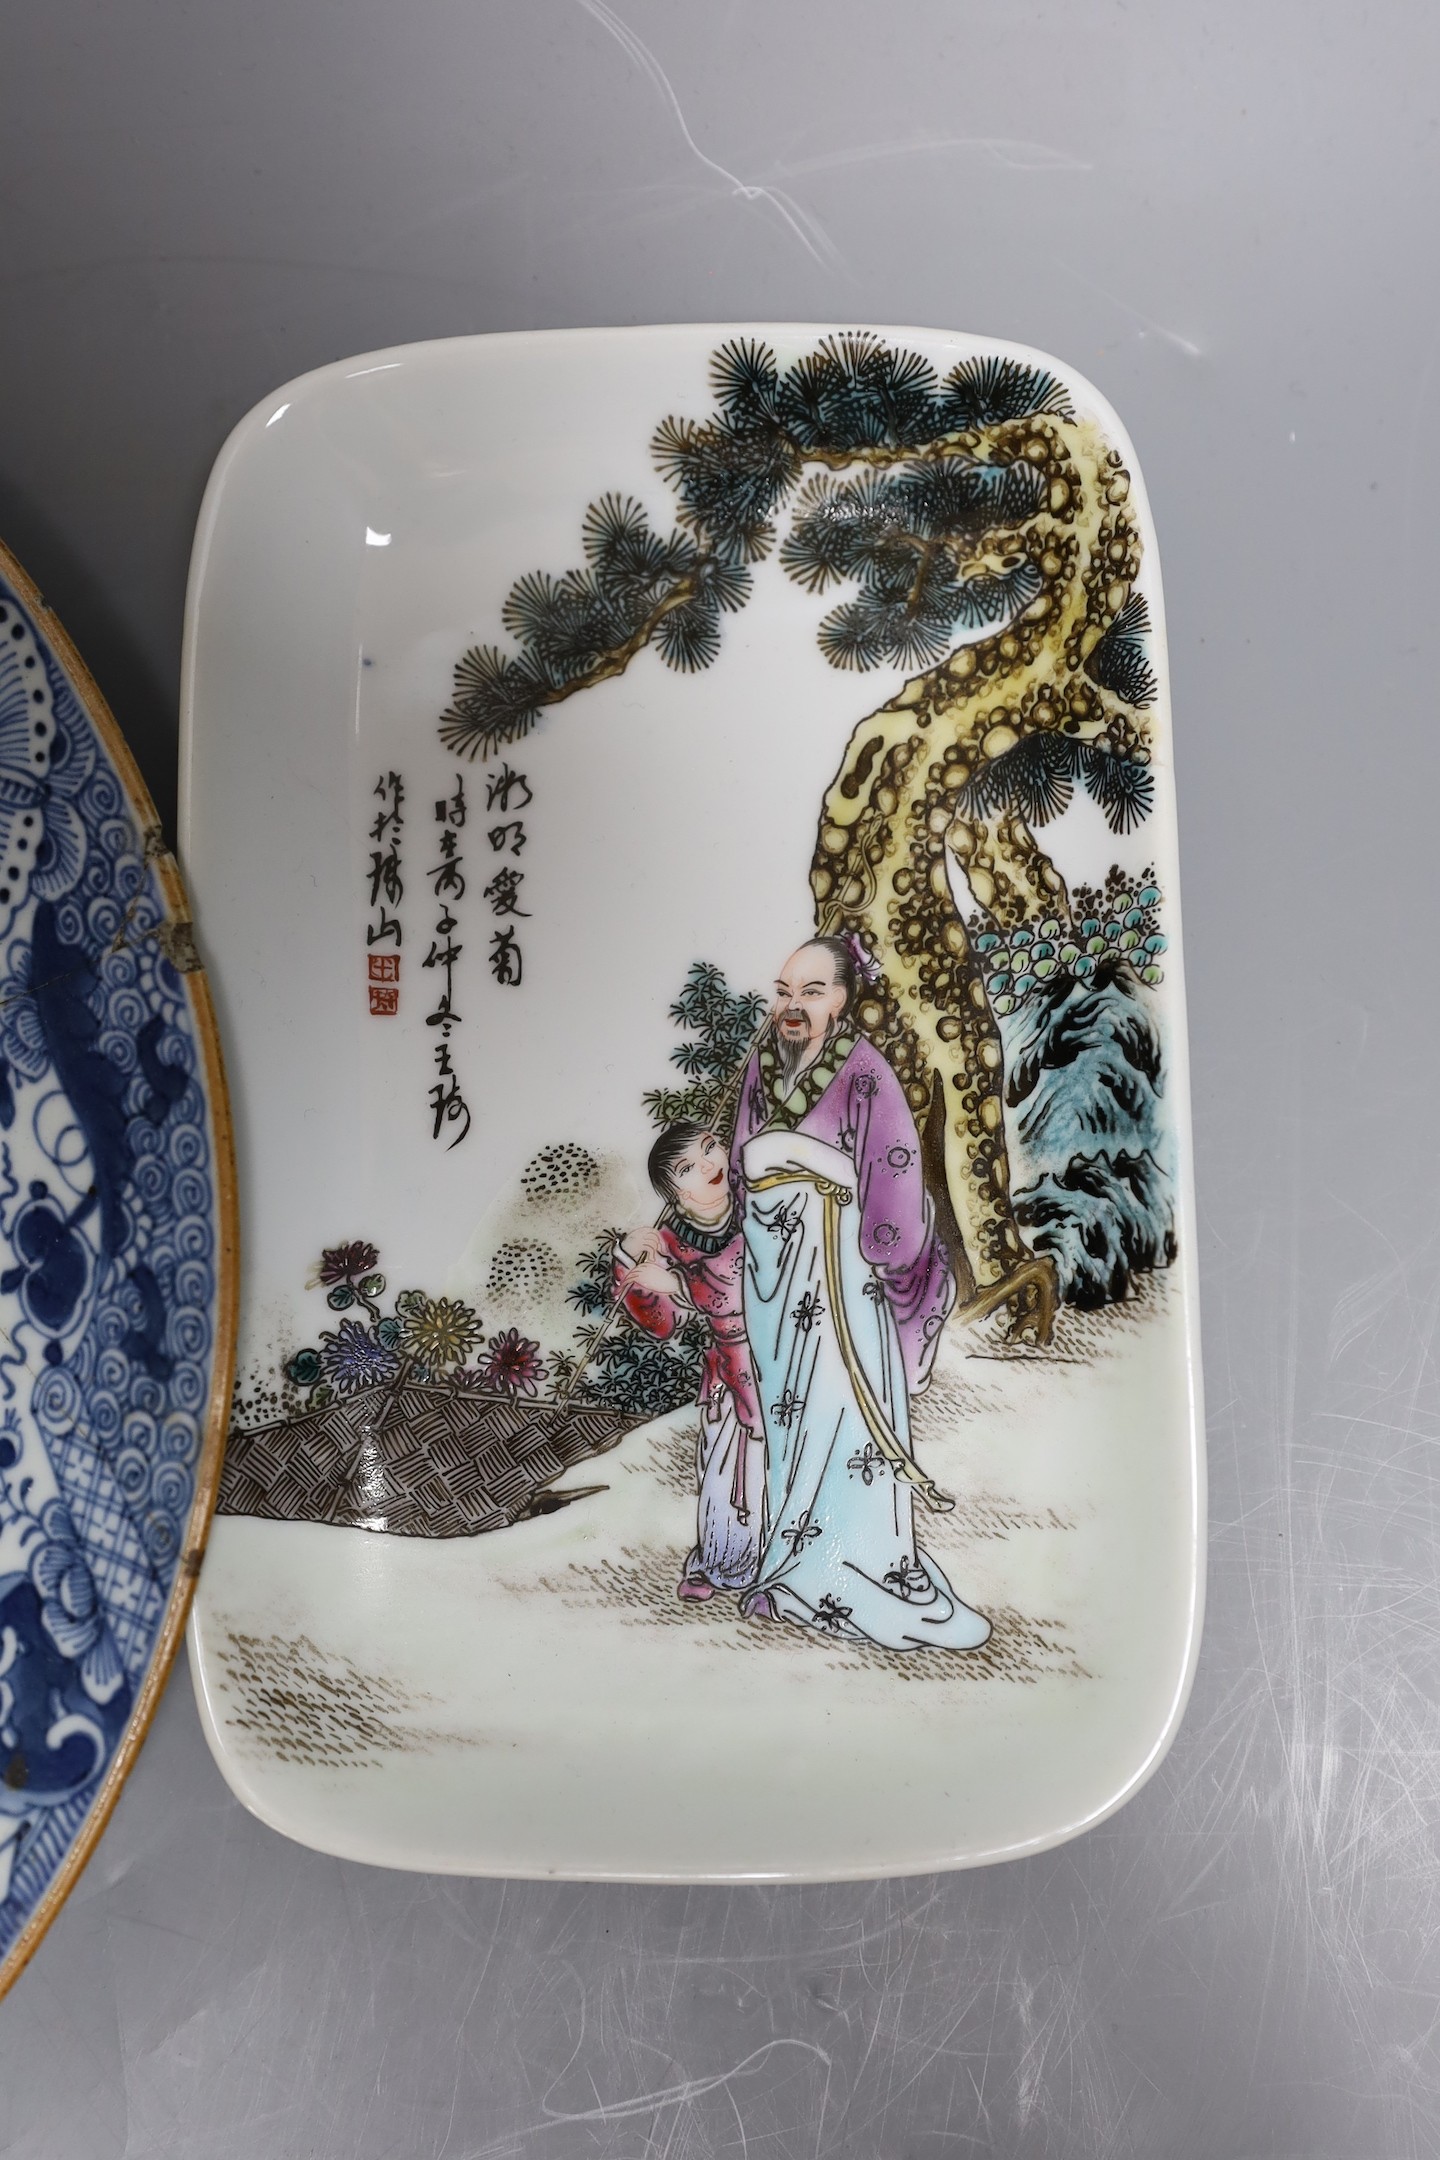 Four 18th / 19th century Chinese plates, and a later dish, largest plate 29cms diameter